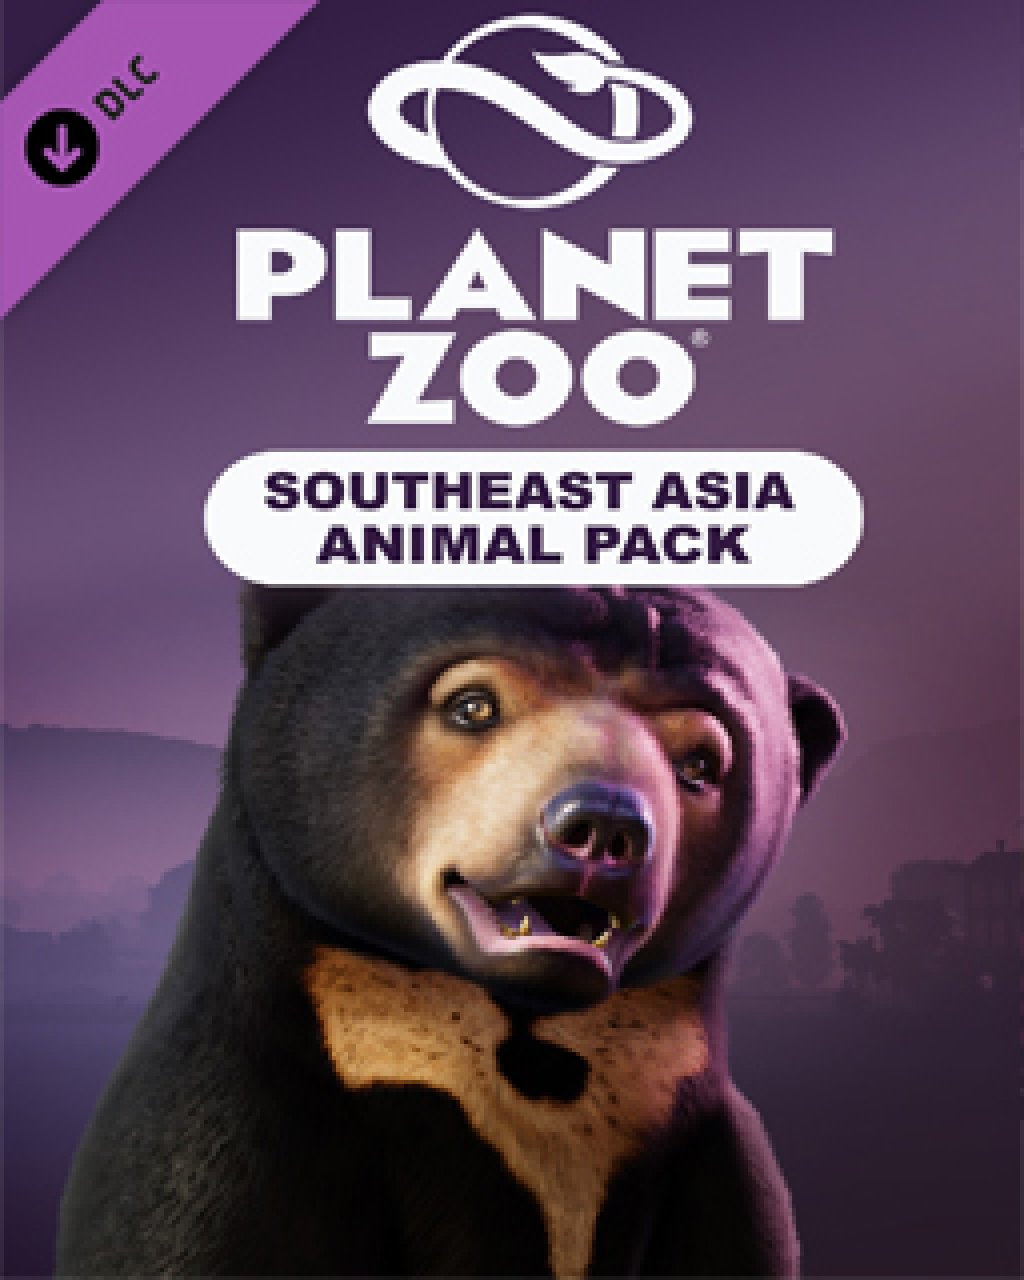 ESD Planet Zoo Southeast Asia Animal Pack